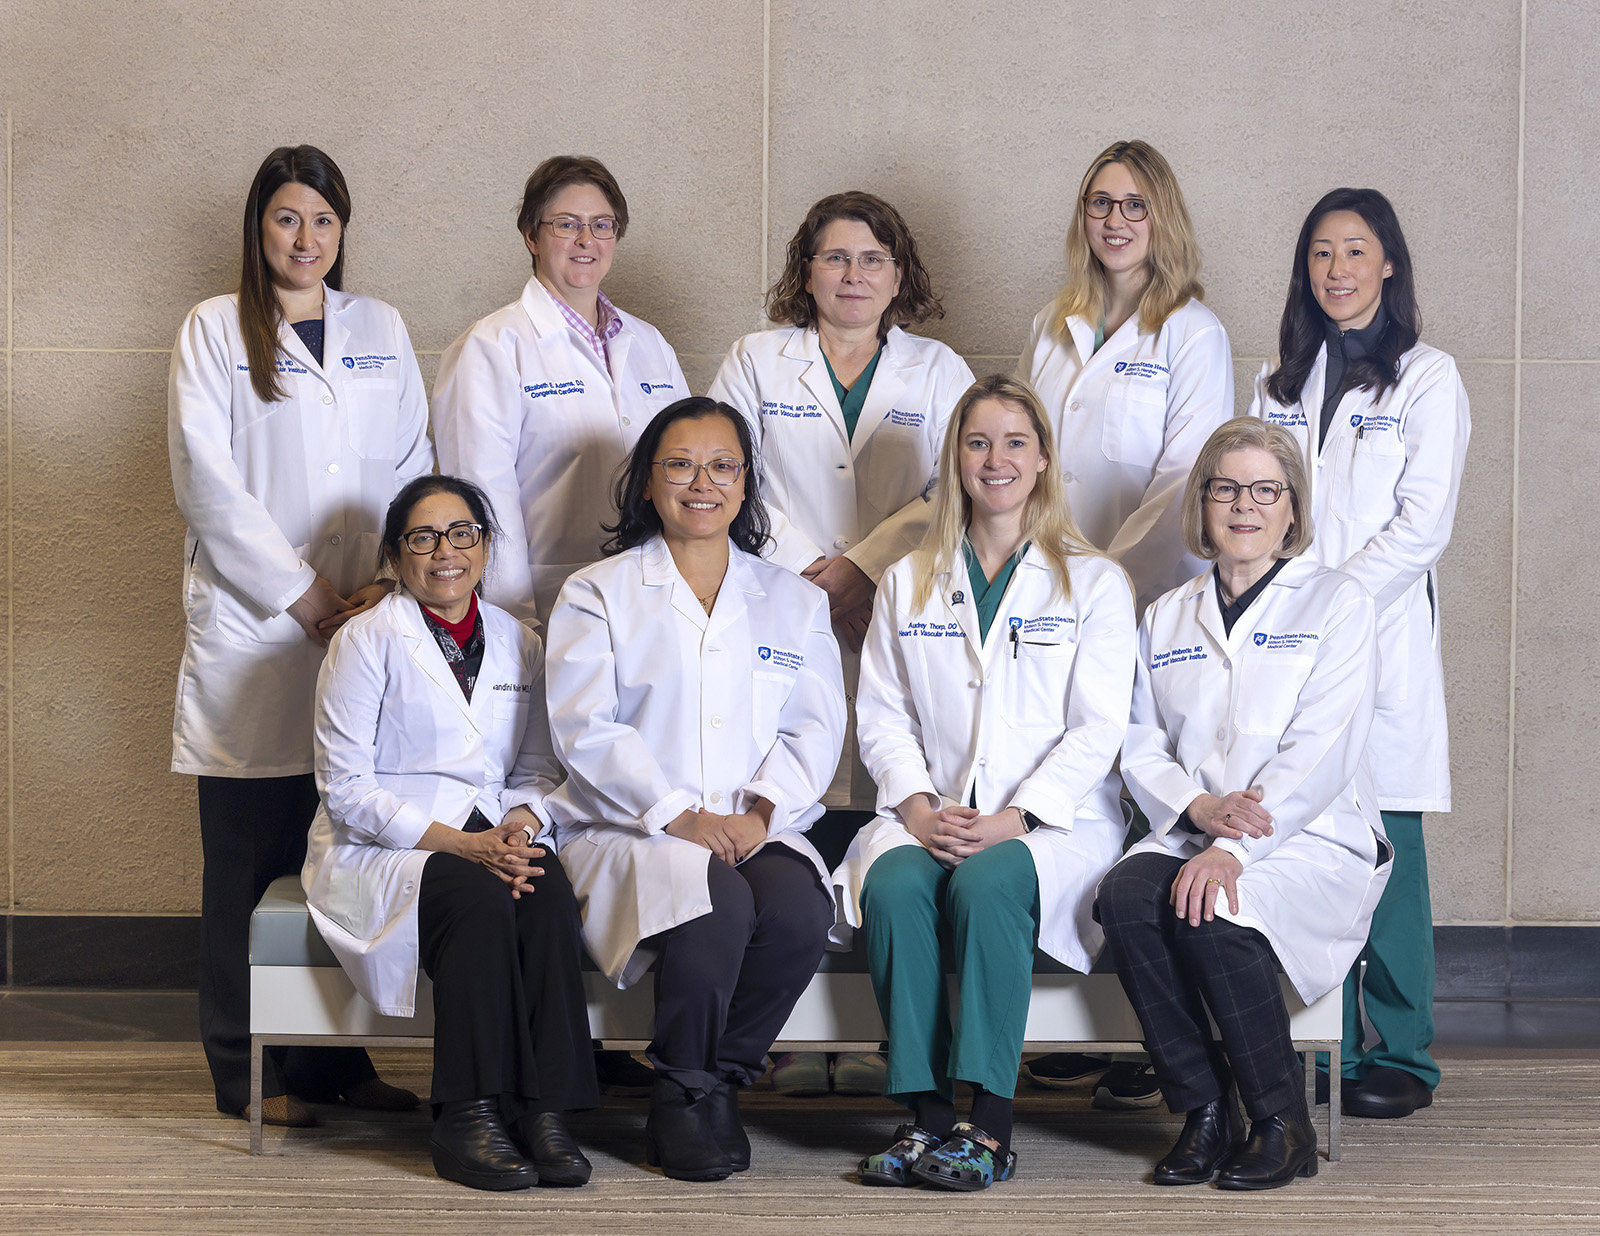 Nine women cardiologists in white coats; four seated in front and five standing in the back.